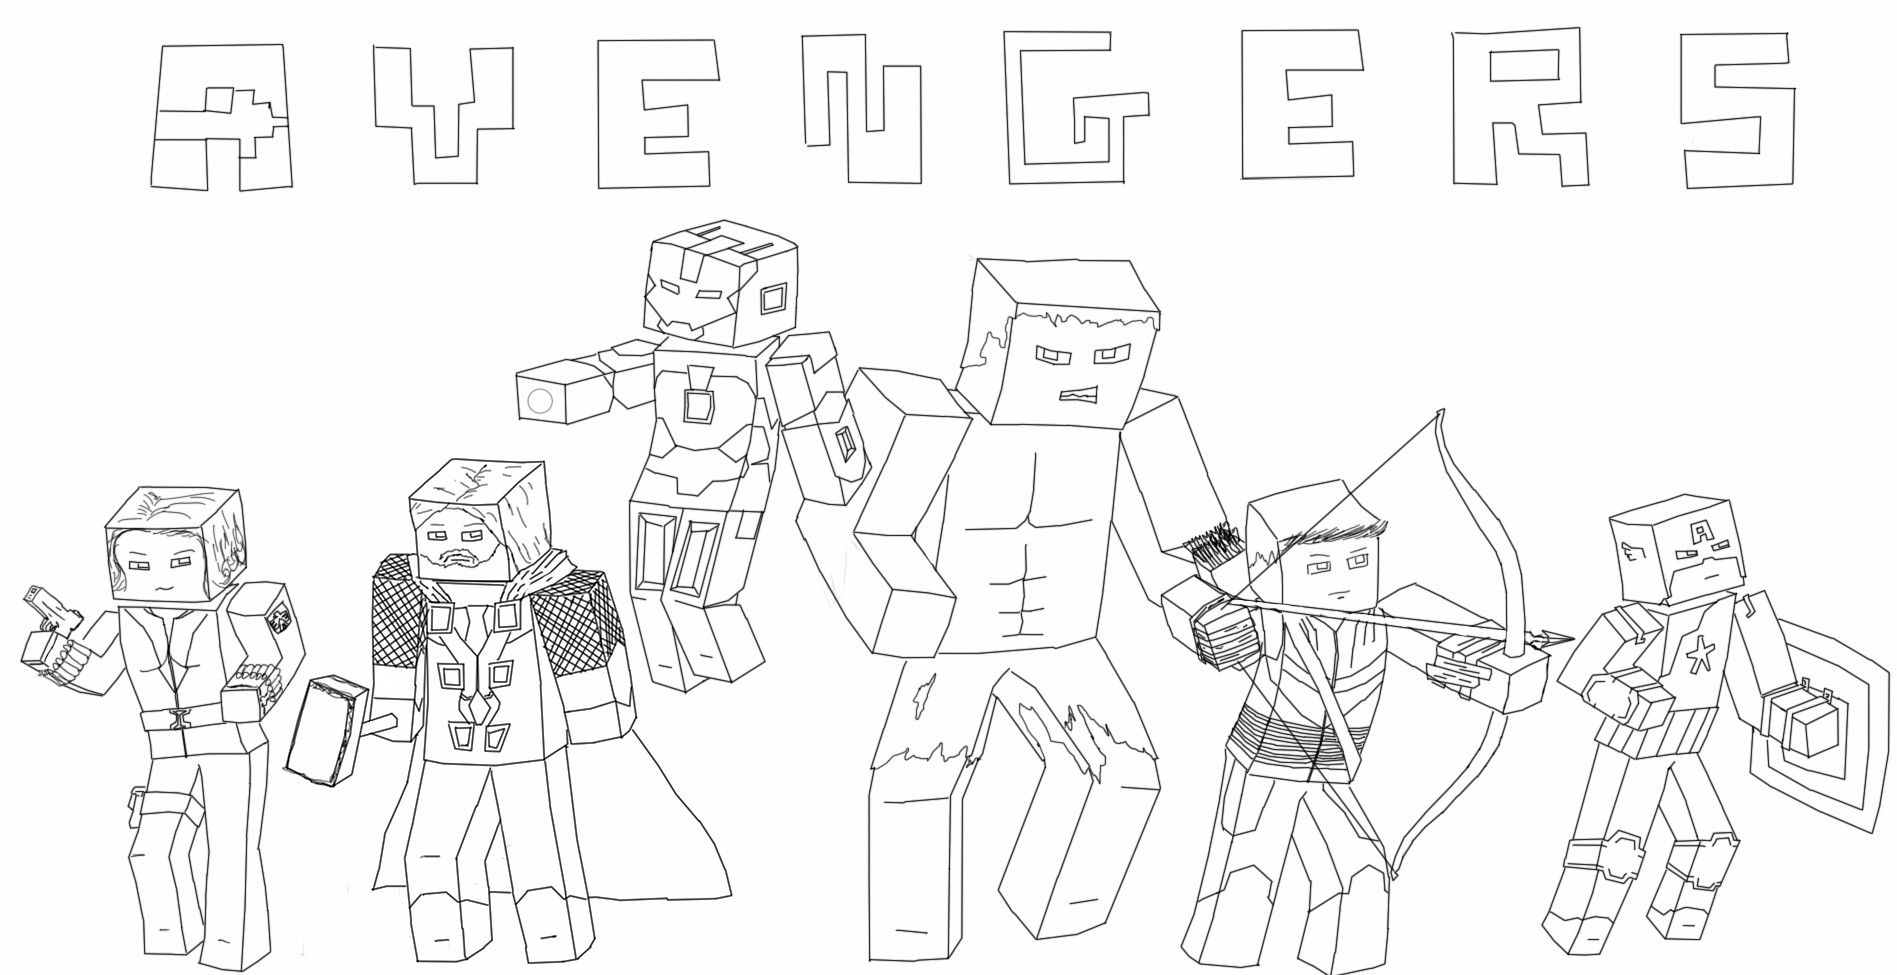 Herobrine Coloring Pages Minecraft Armor Coloring Pages New Herobrine With Sword Coloring